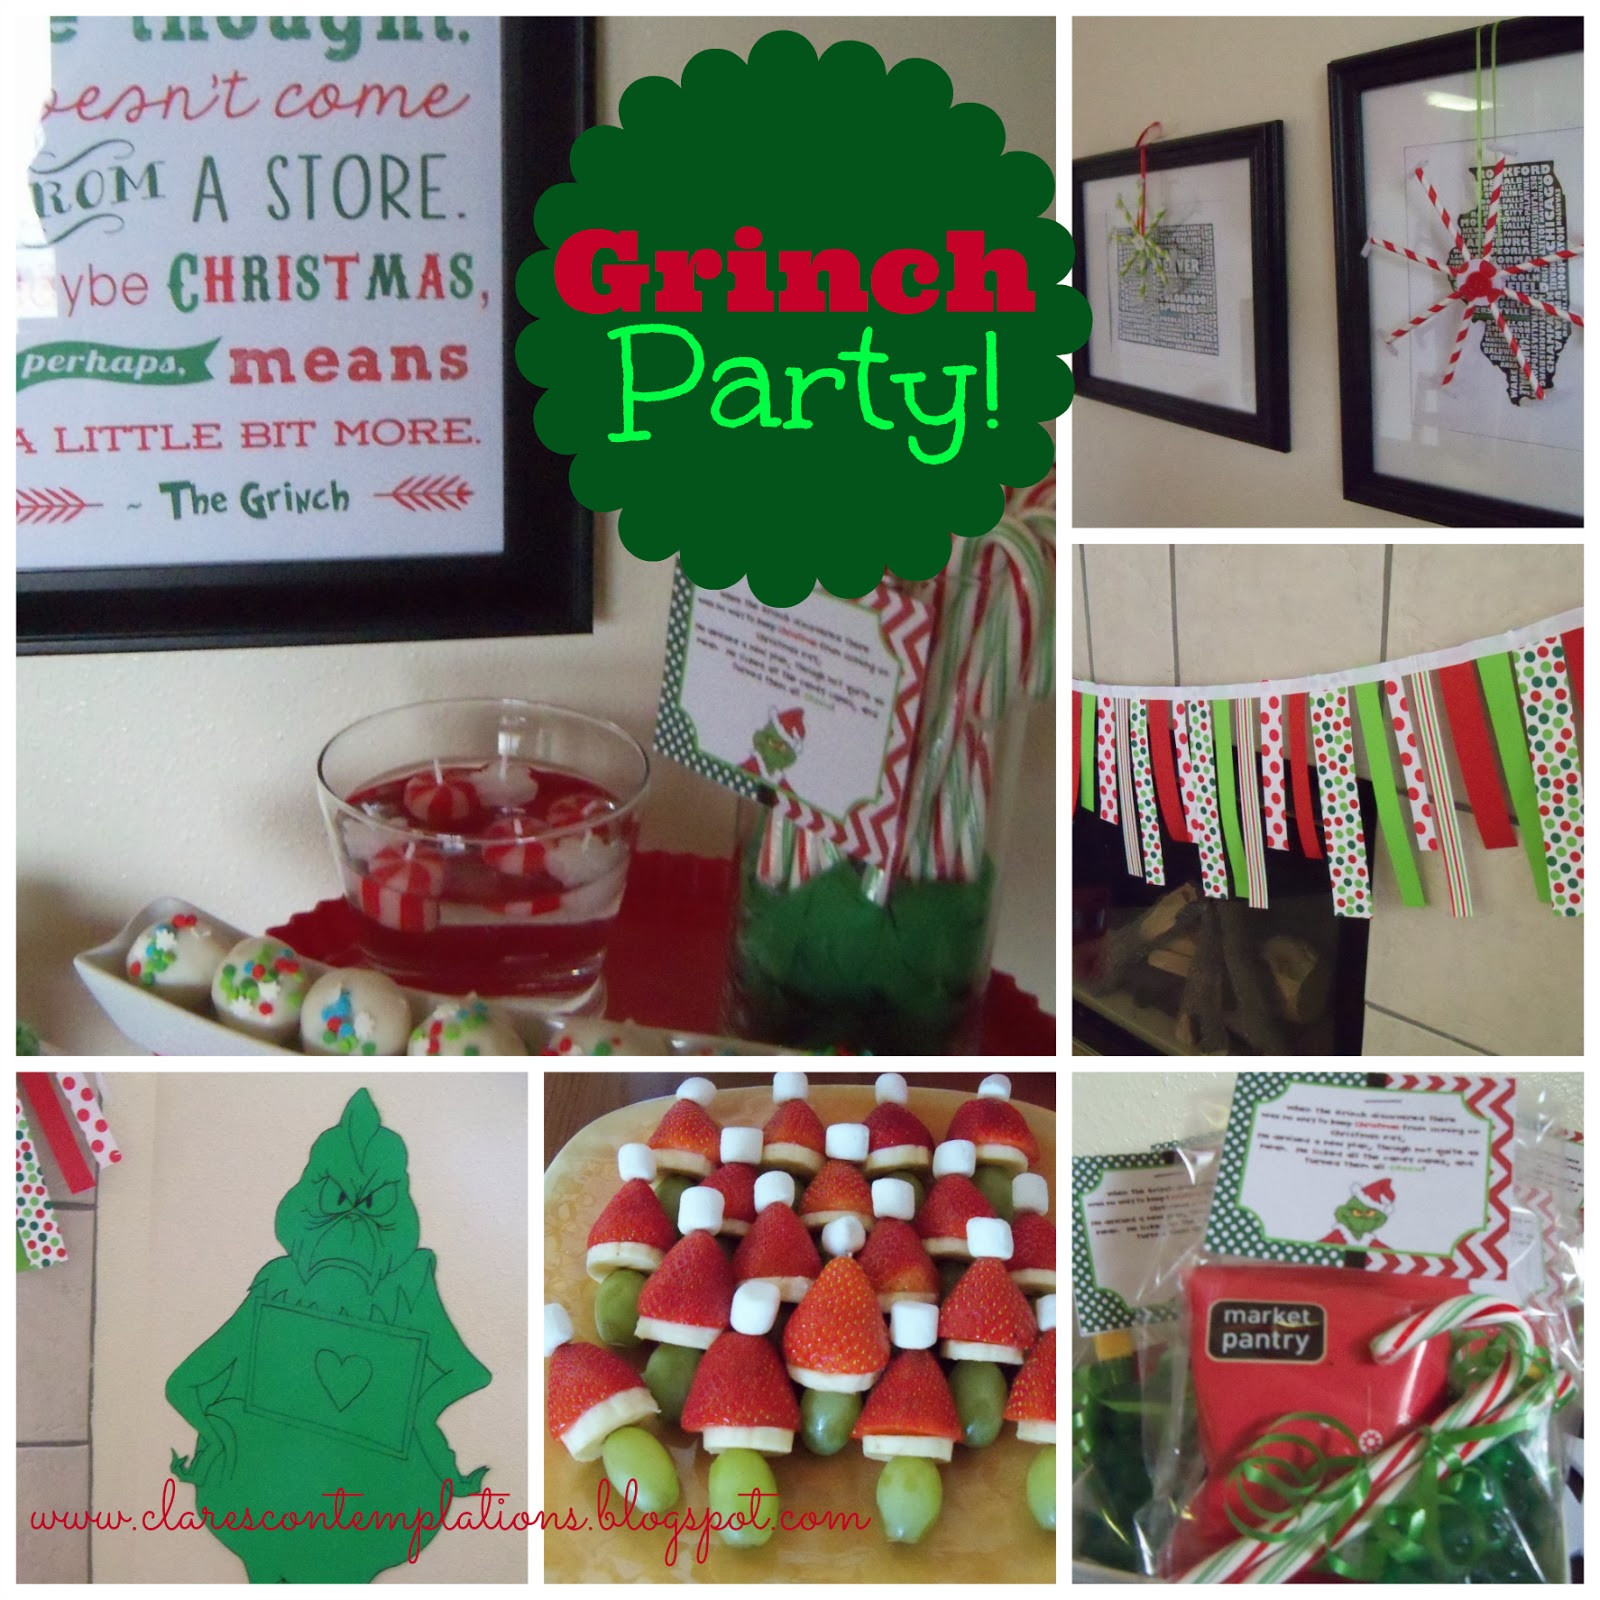 Good Christmas Party Ideas
 Clare s Contemplations Great Grinch Party